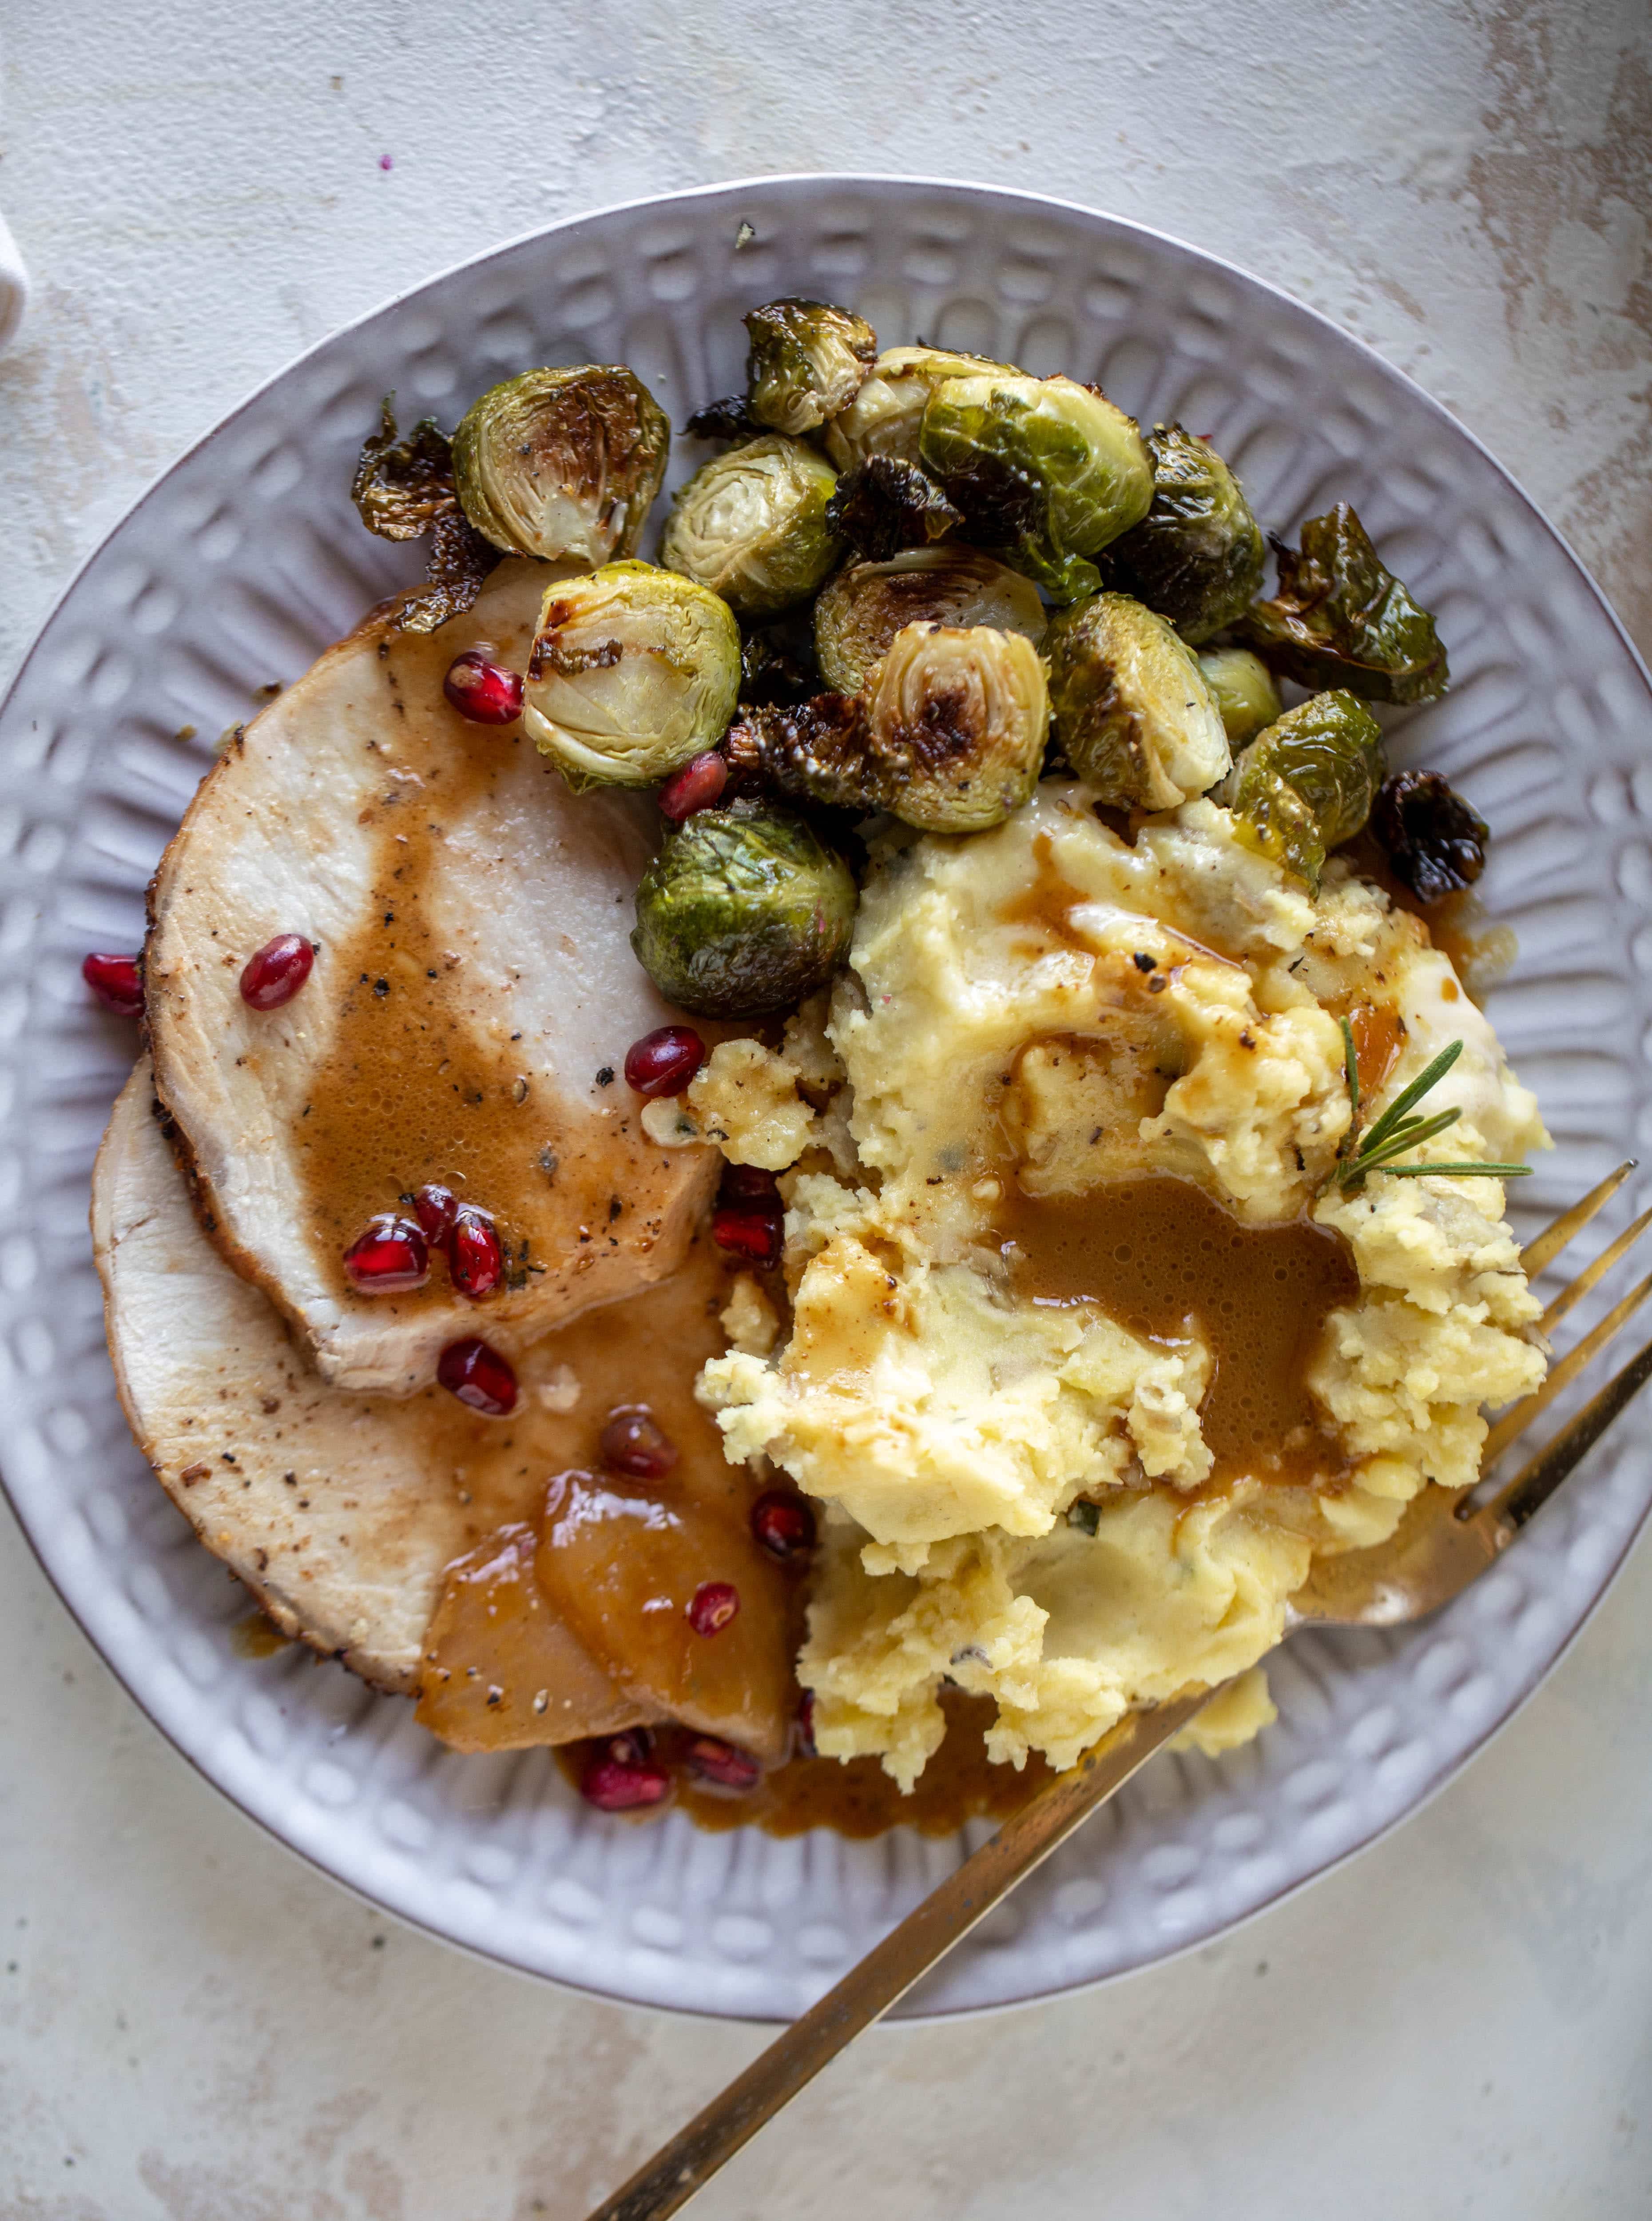 20 Meals To Make On Thanksgiving If You Don't Want To Eat Turkey and Stuffing